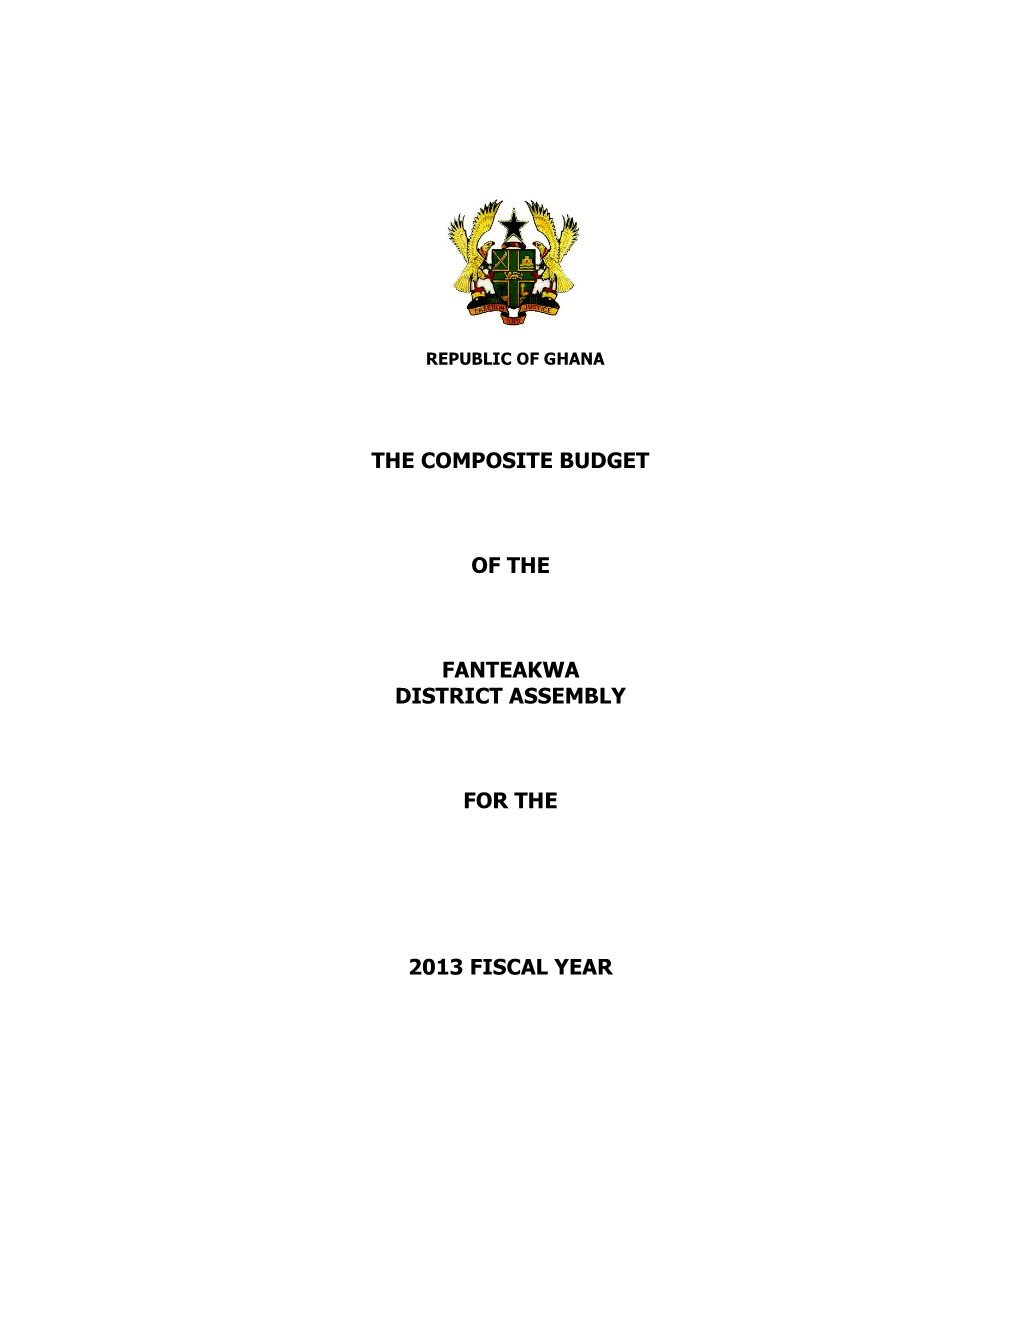 The Composite Budget of The